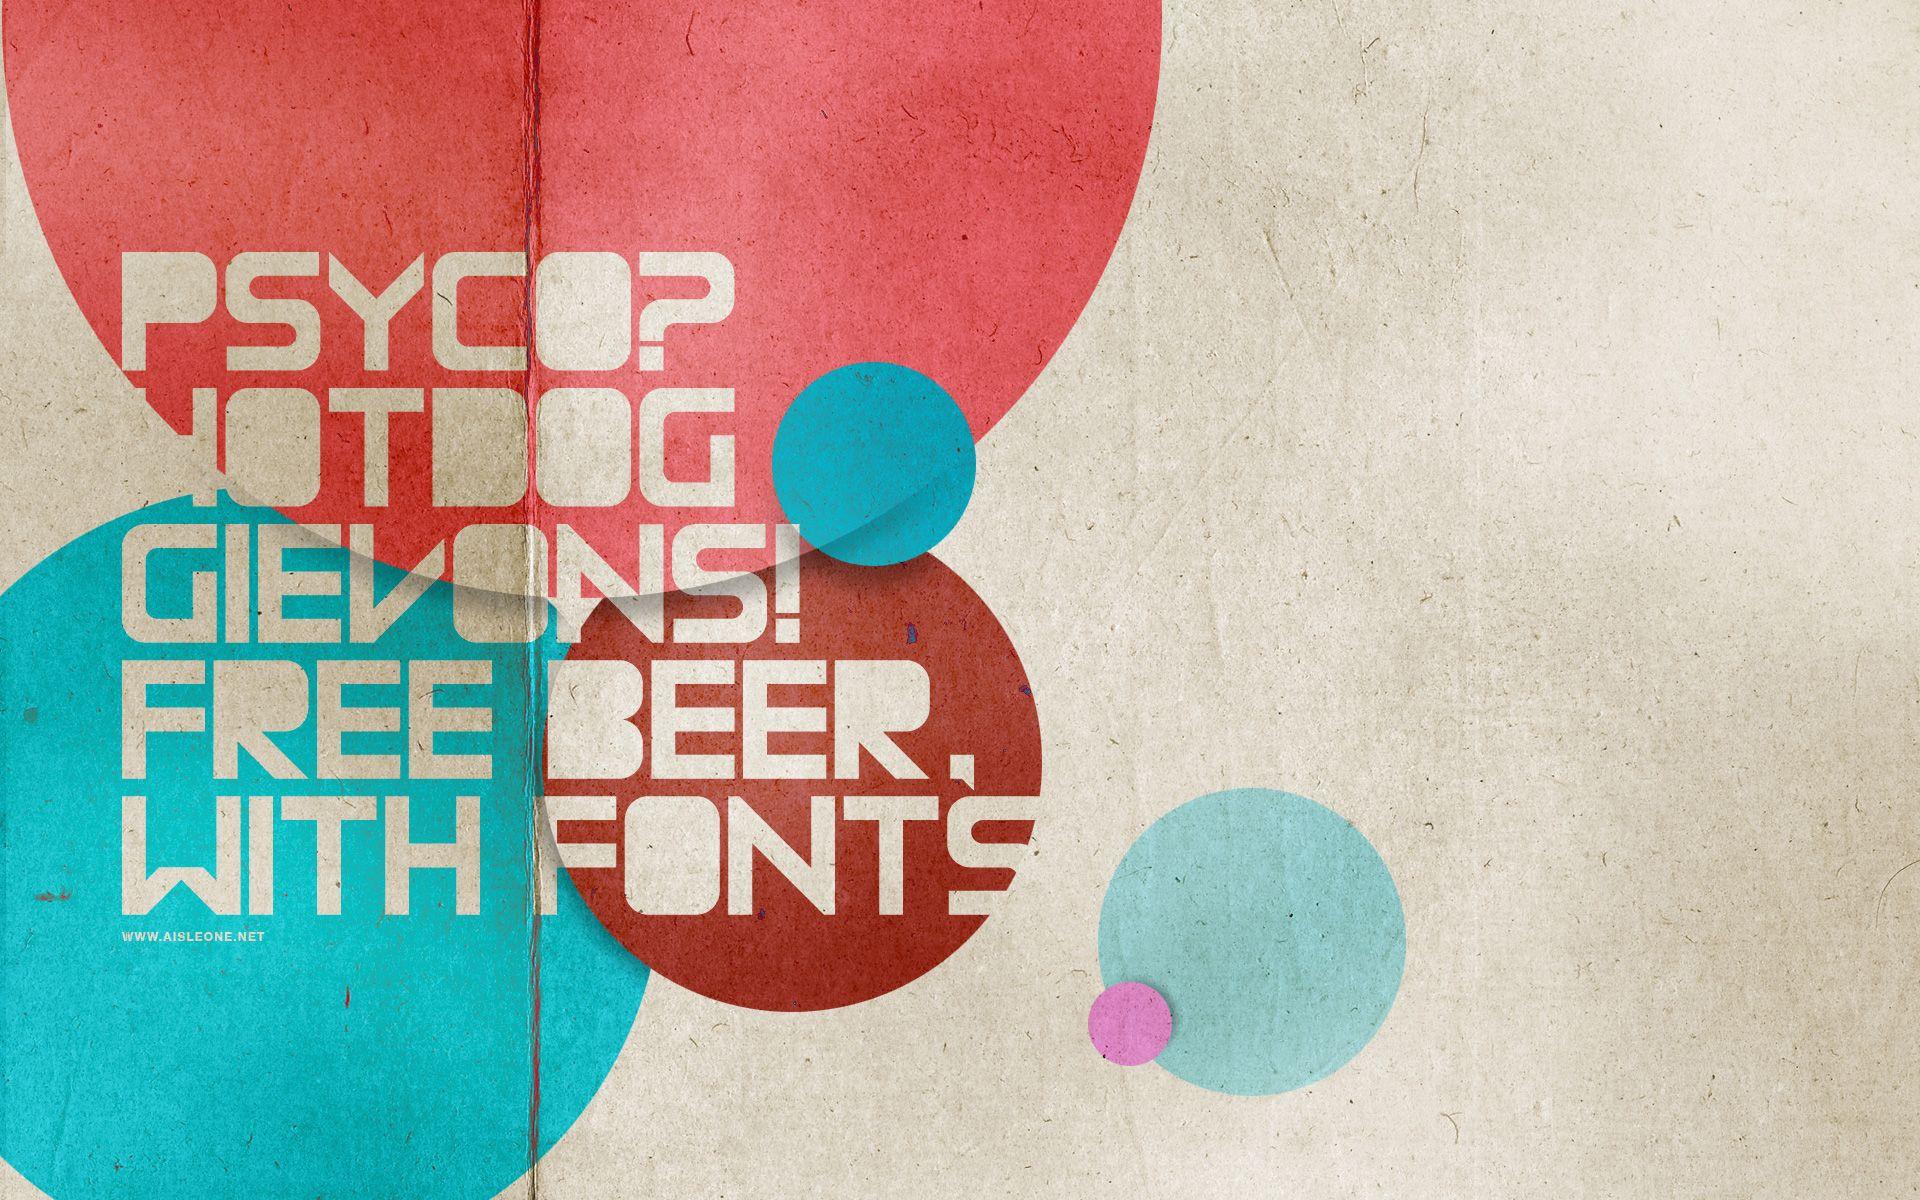 Download the Free Beer With Fonts Wallpaper, Free Beer With Fonts